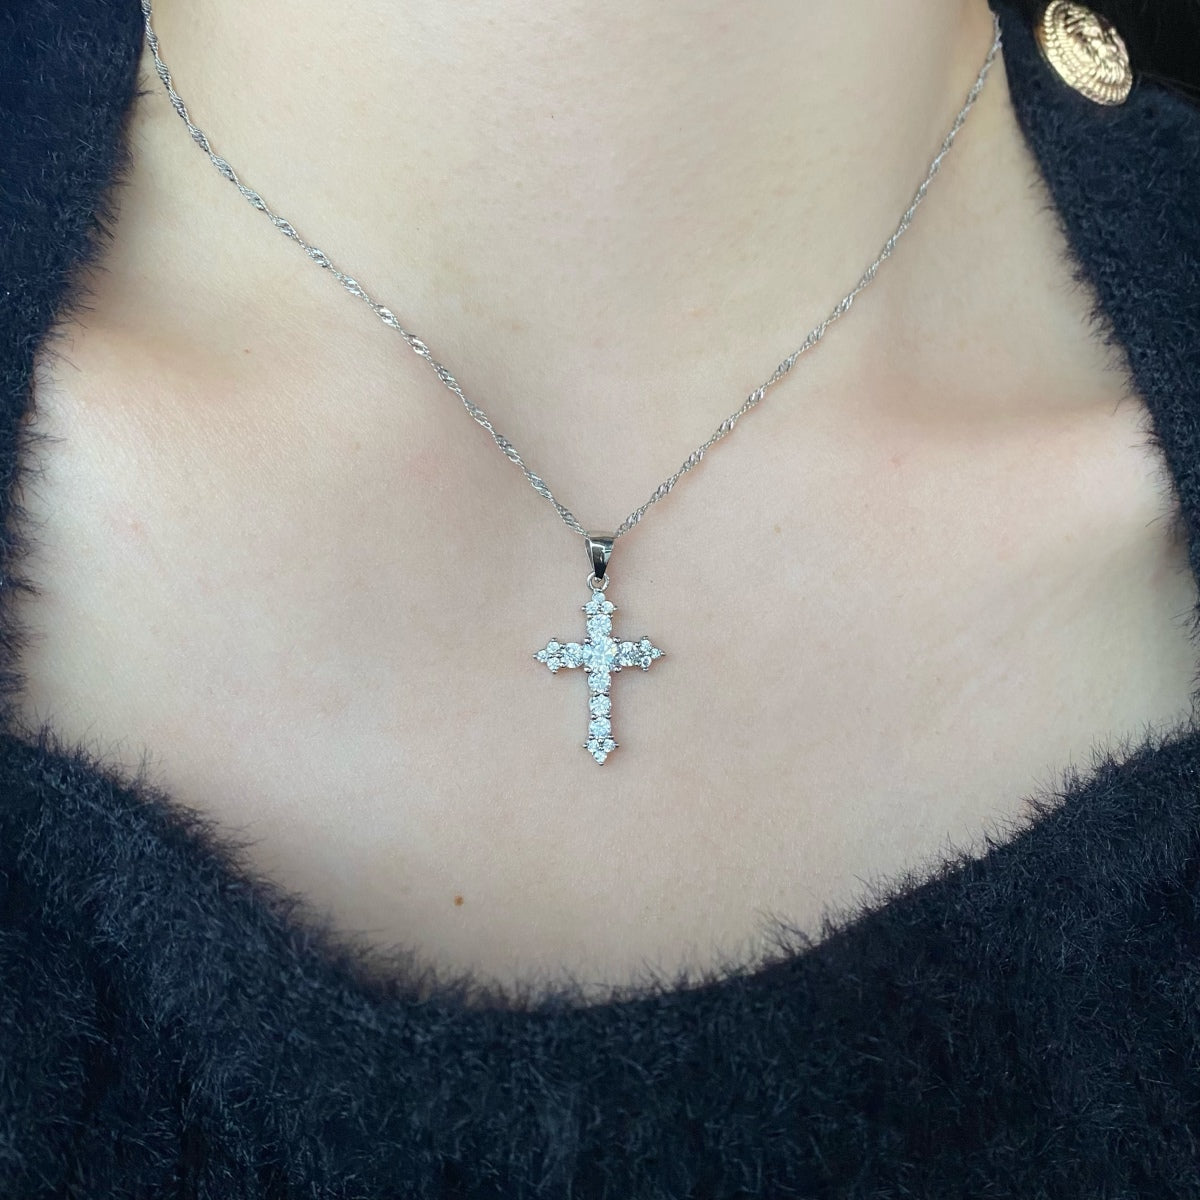 Silver Latest Cross Design Pendant With Link Chain